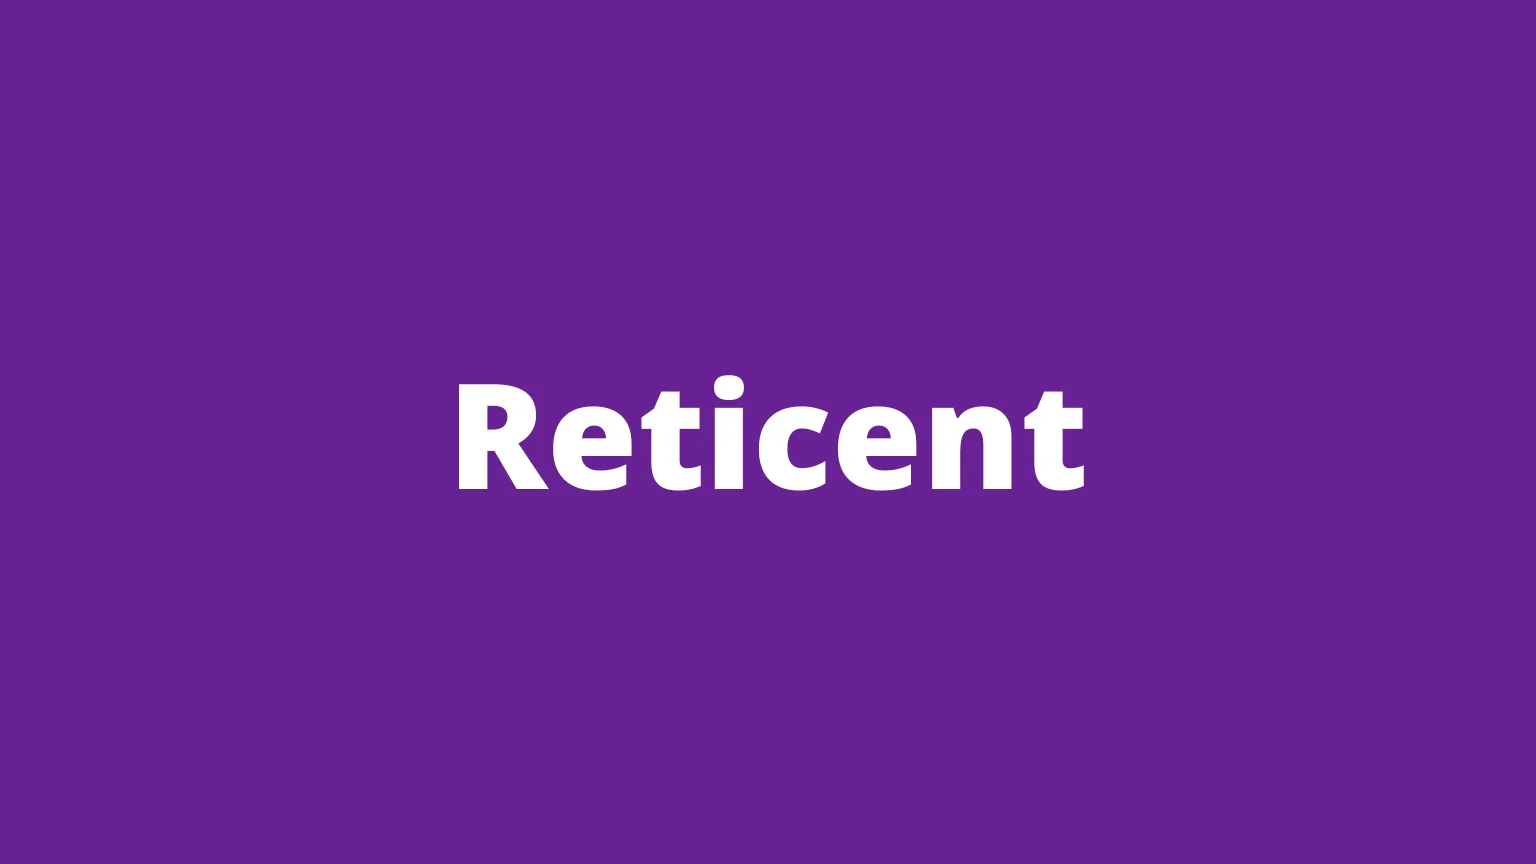 The word reticent and its meaning